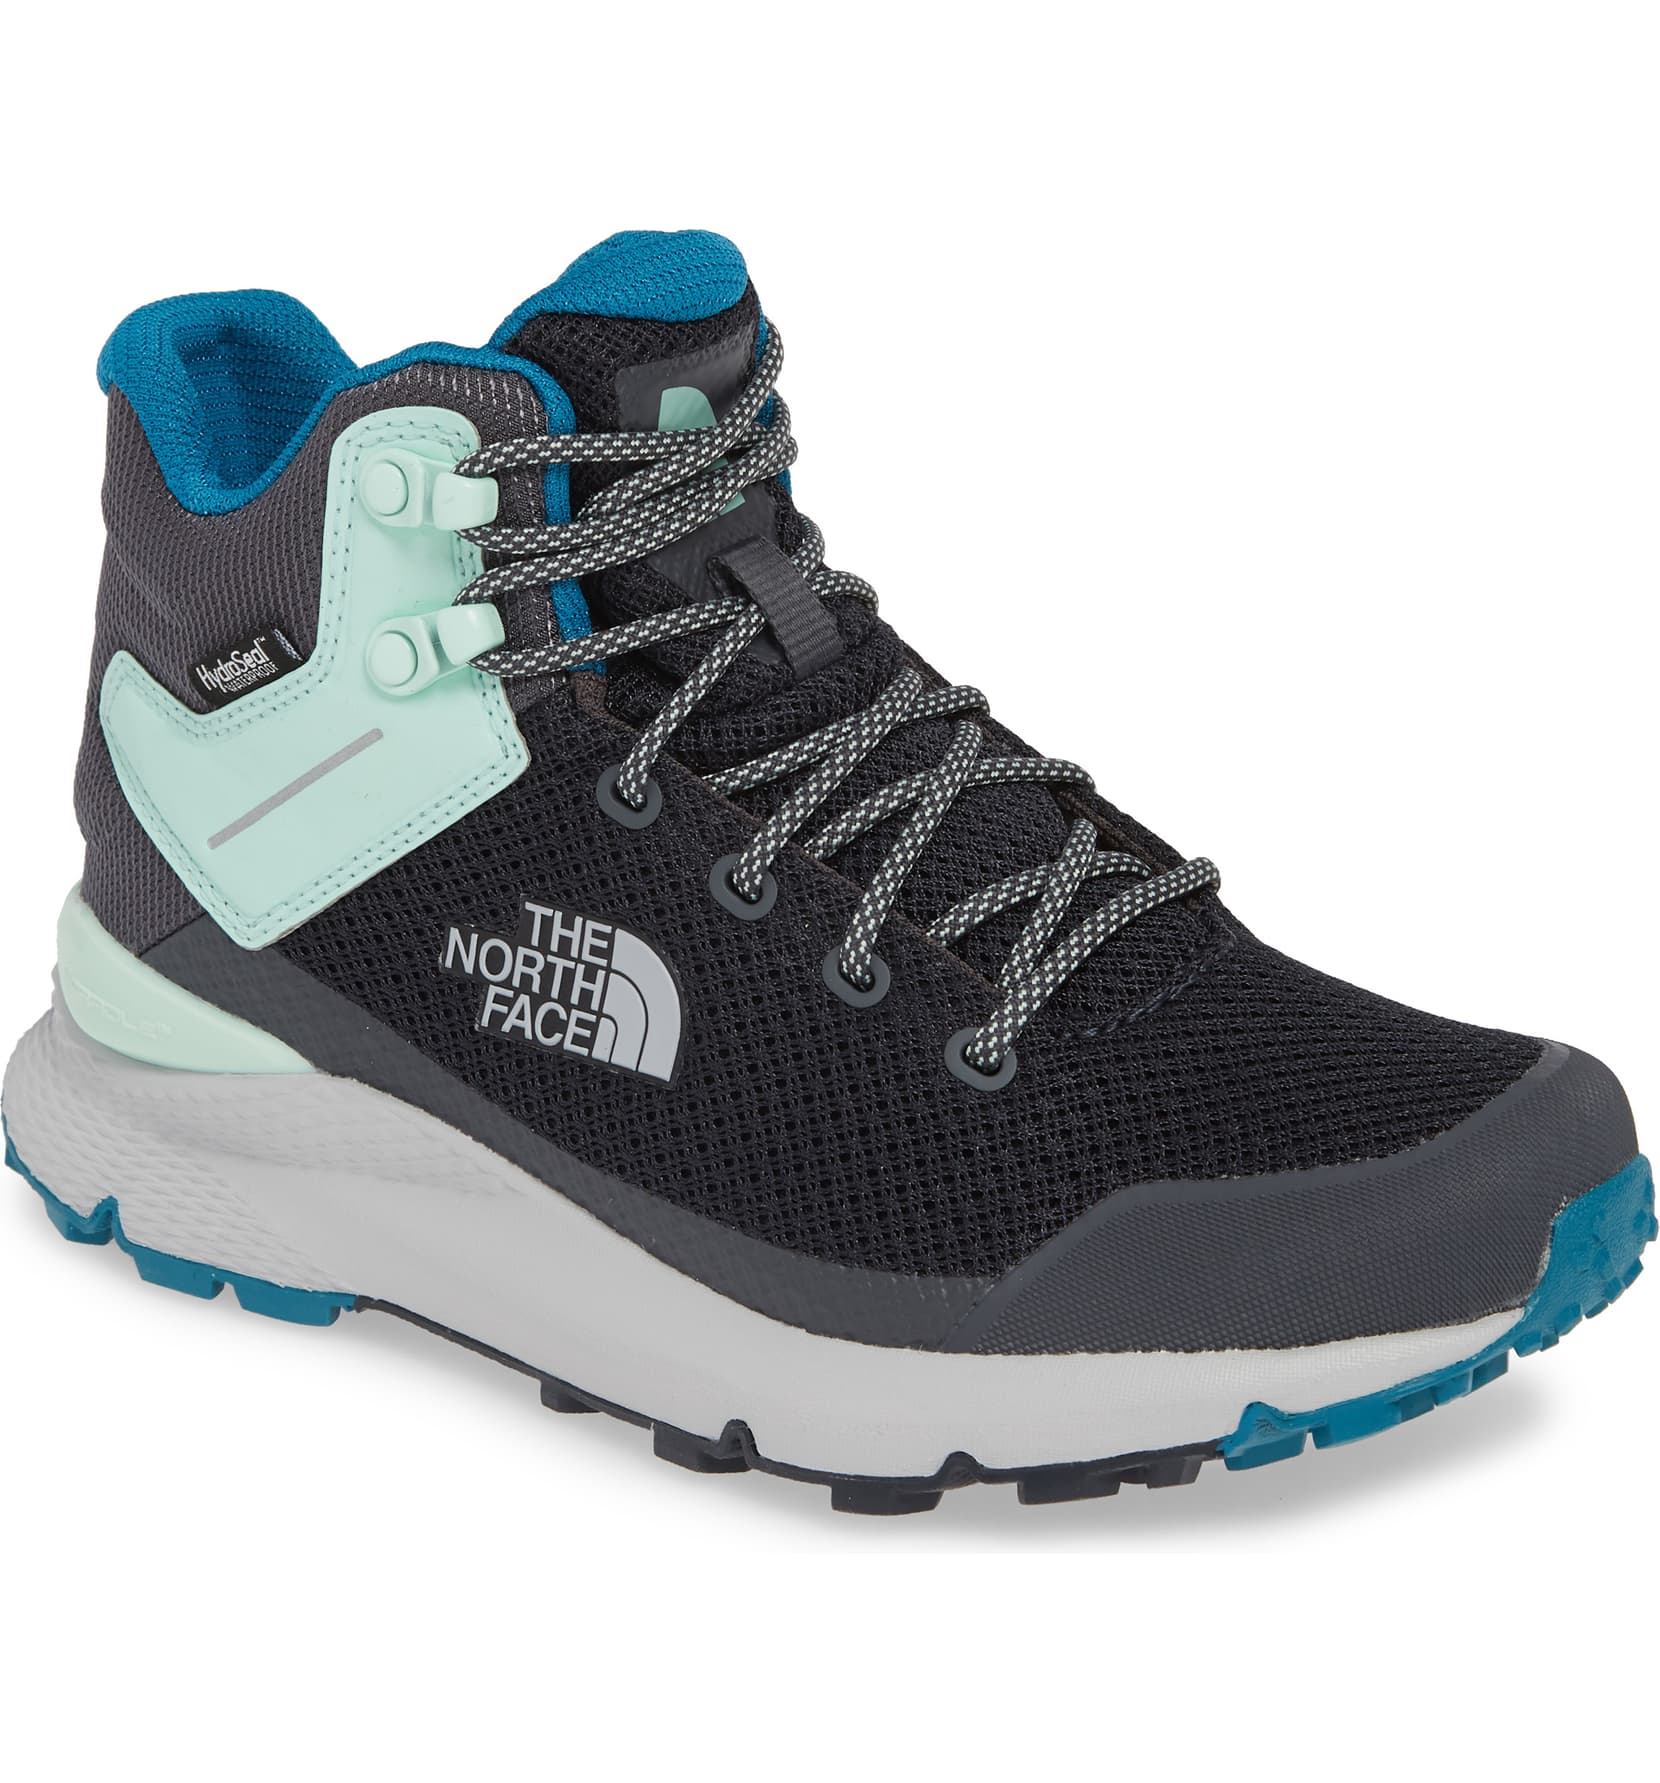 vals wp hiking boots